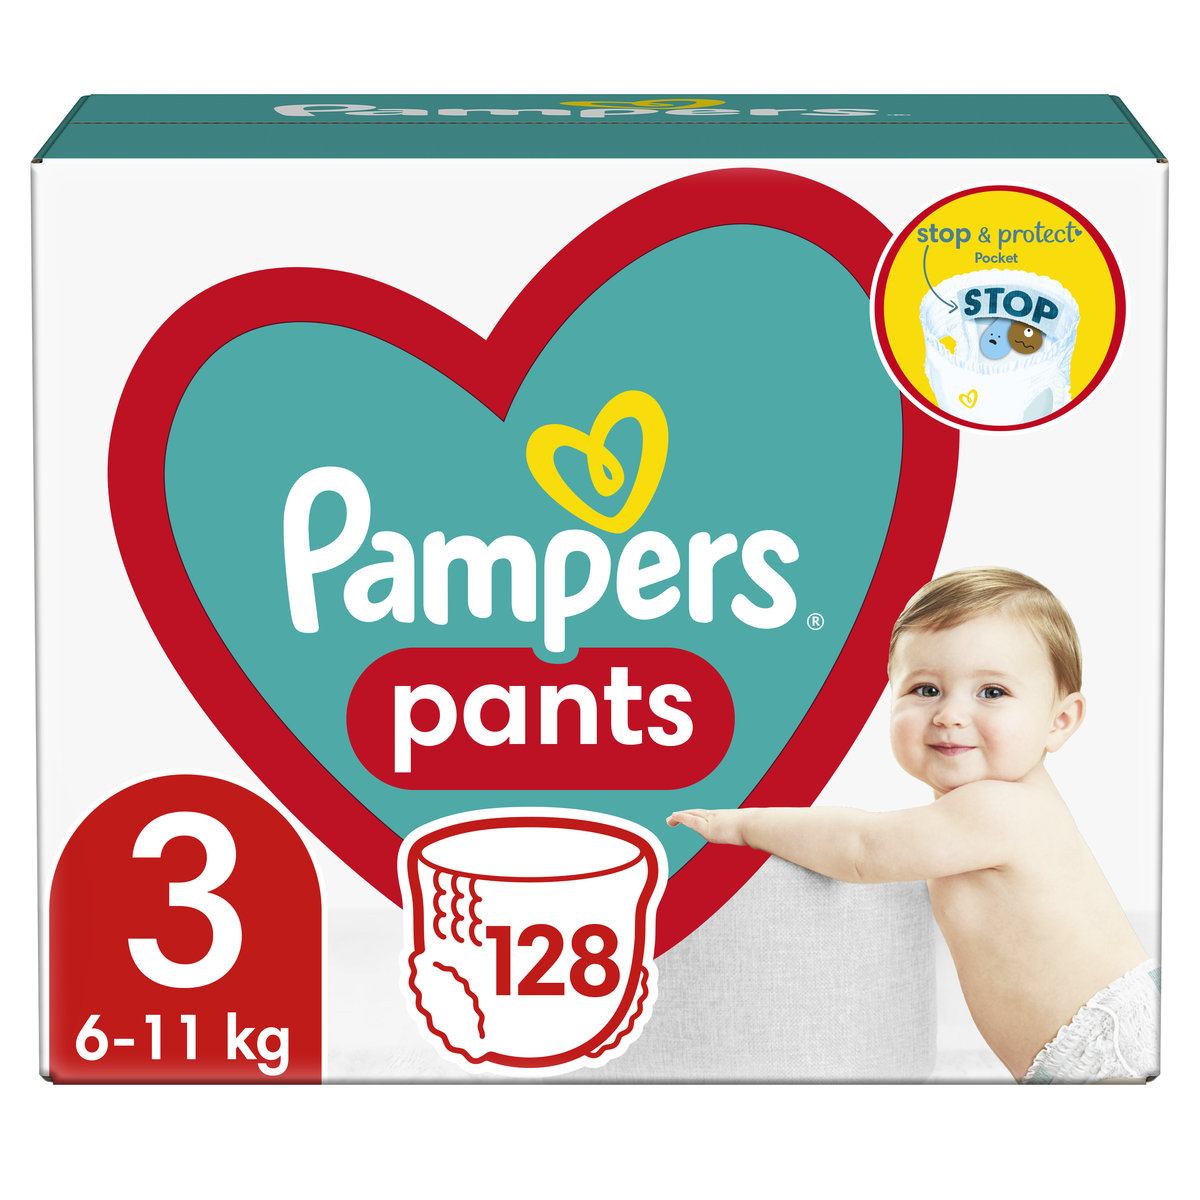 pampers premium protection new baby rozmiar 1 23er